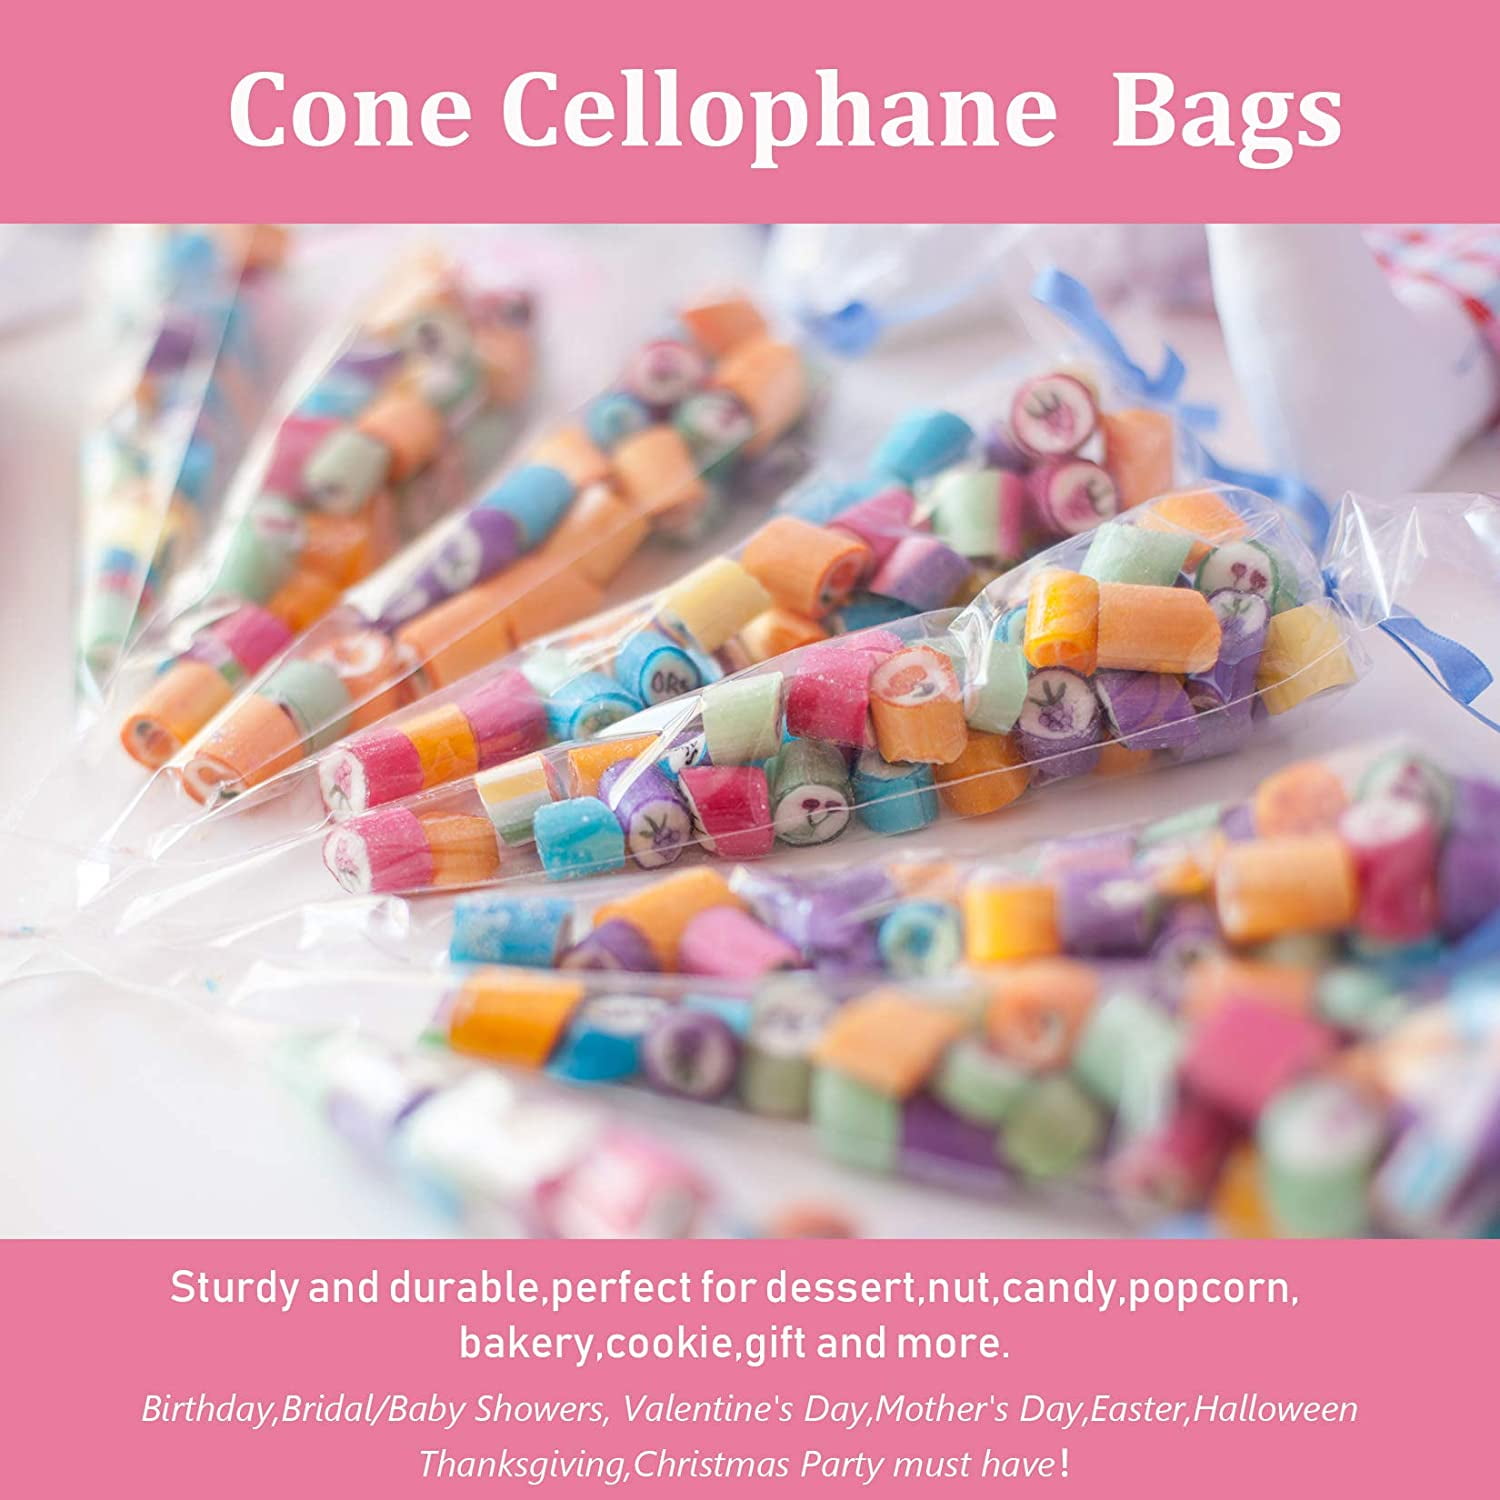 Plastic Cone Bags Triangle Bags for Popcorn Favor Candy Cone Cellophane Bags,200 PCS 6.3x11.8 Cello Clear Cone Shaped Treat Bags with Twist Ties 